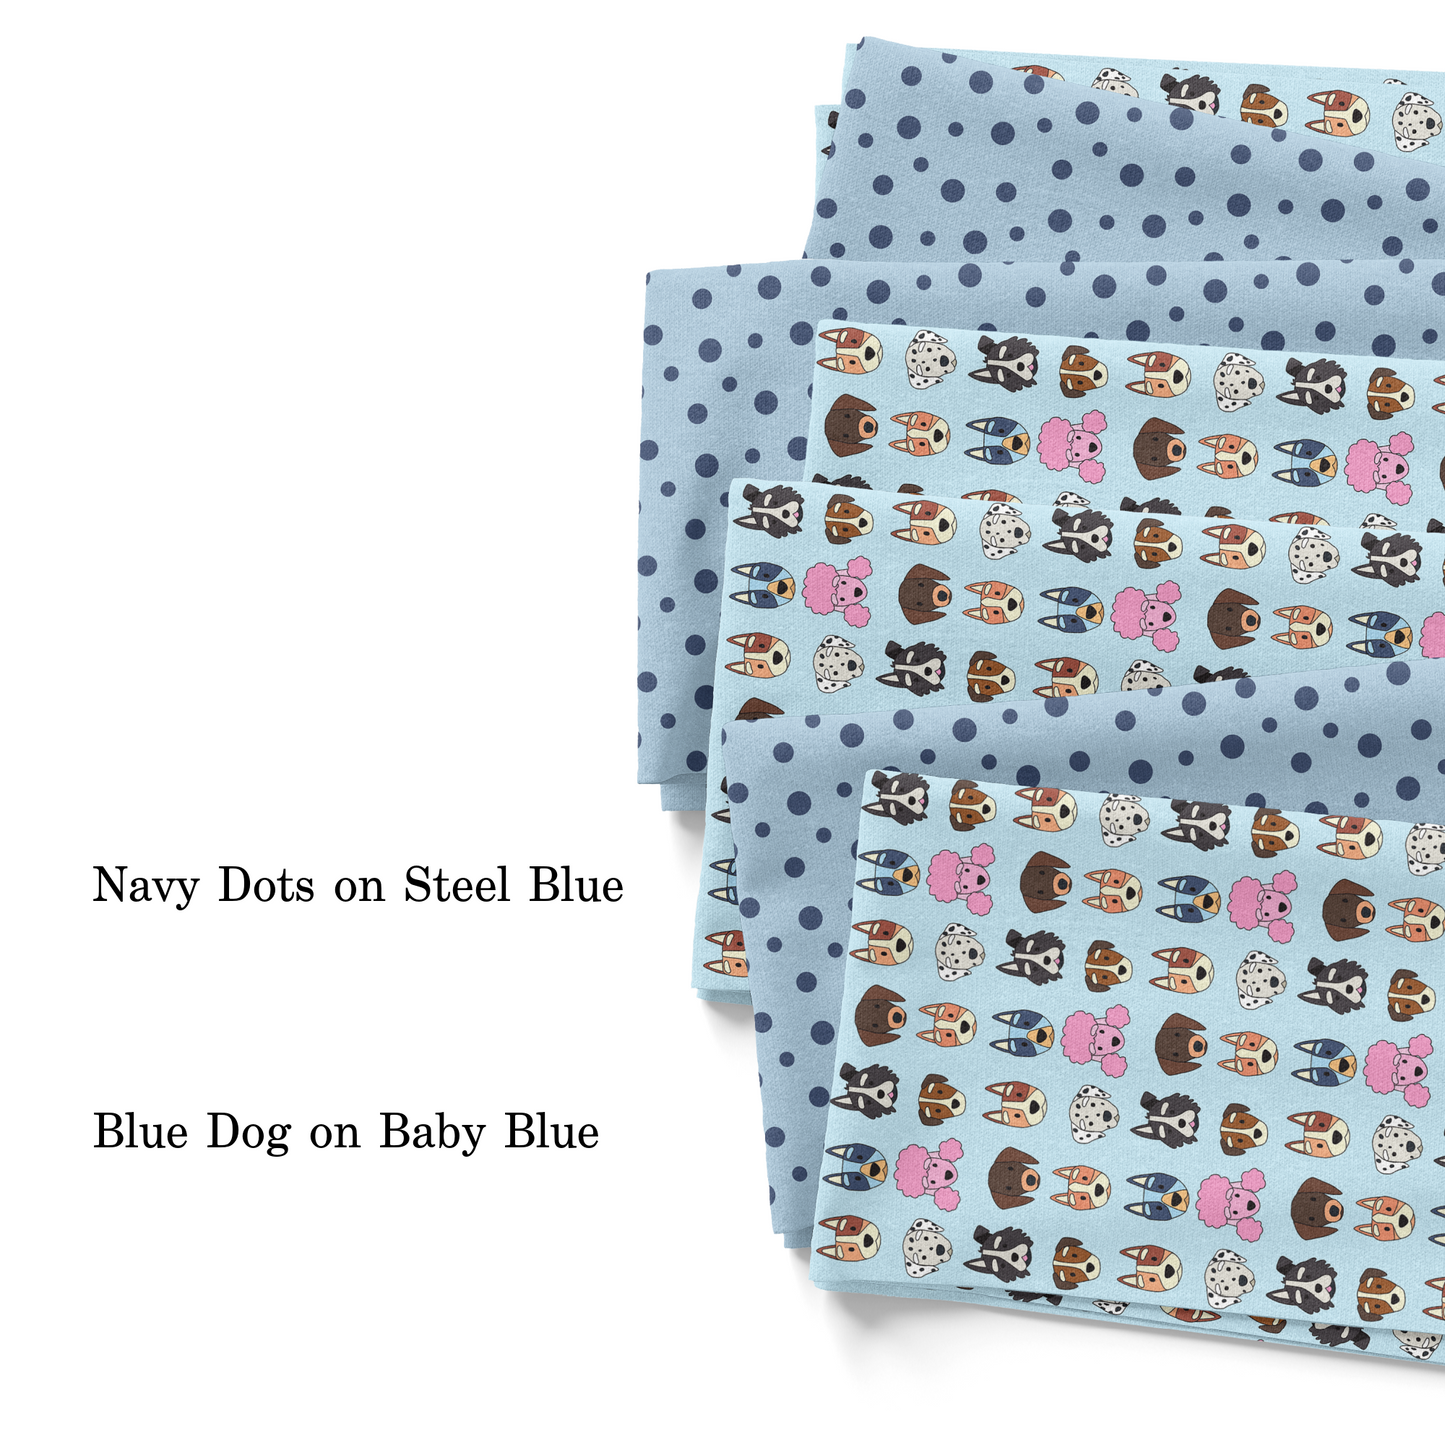 Blue Dog on Baby Blue Fabric By The Yard